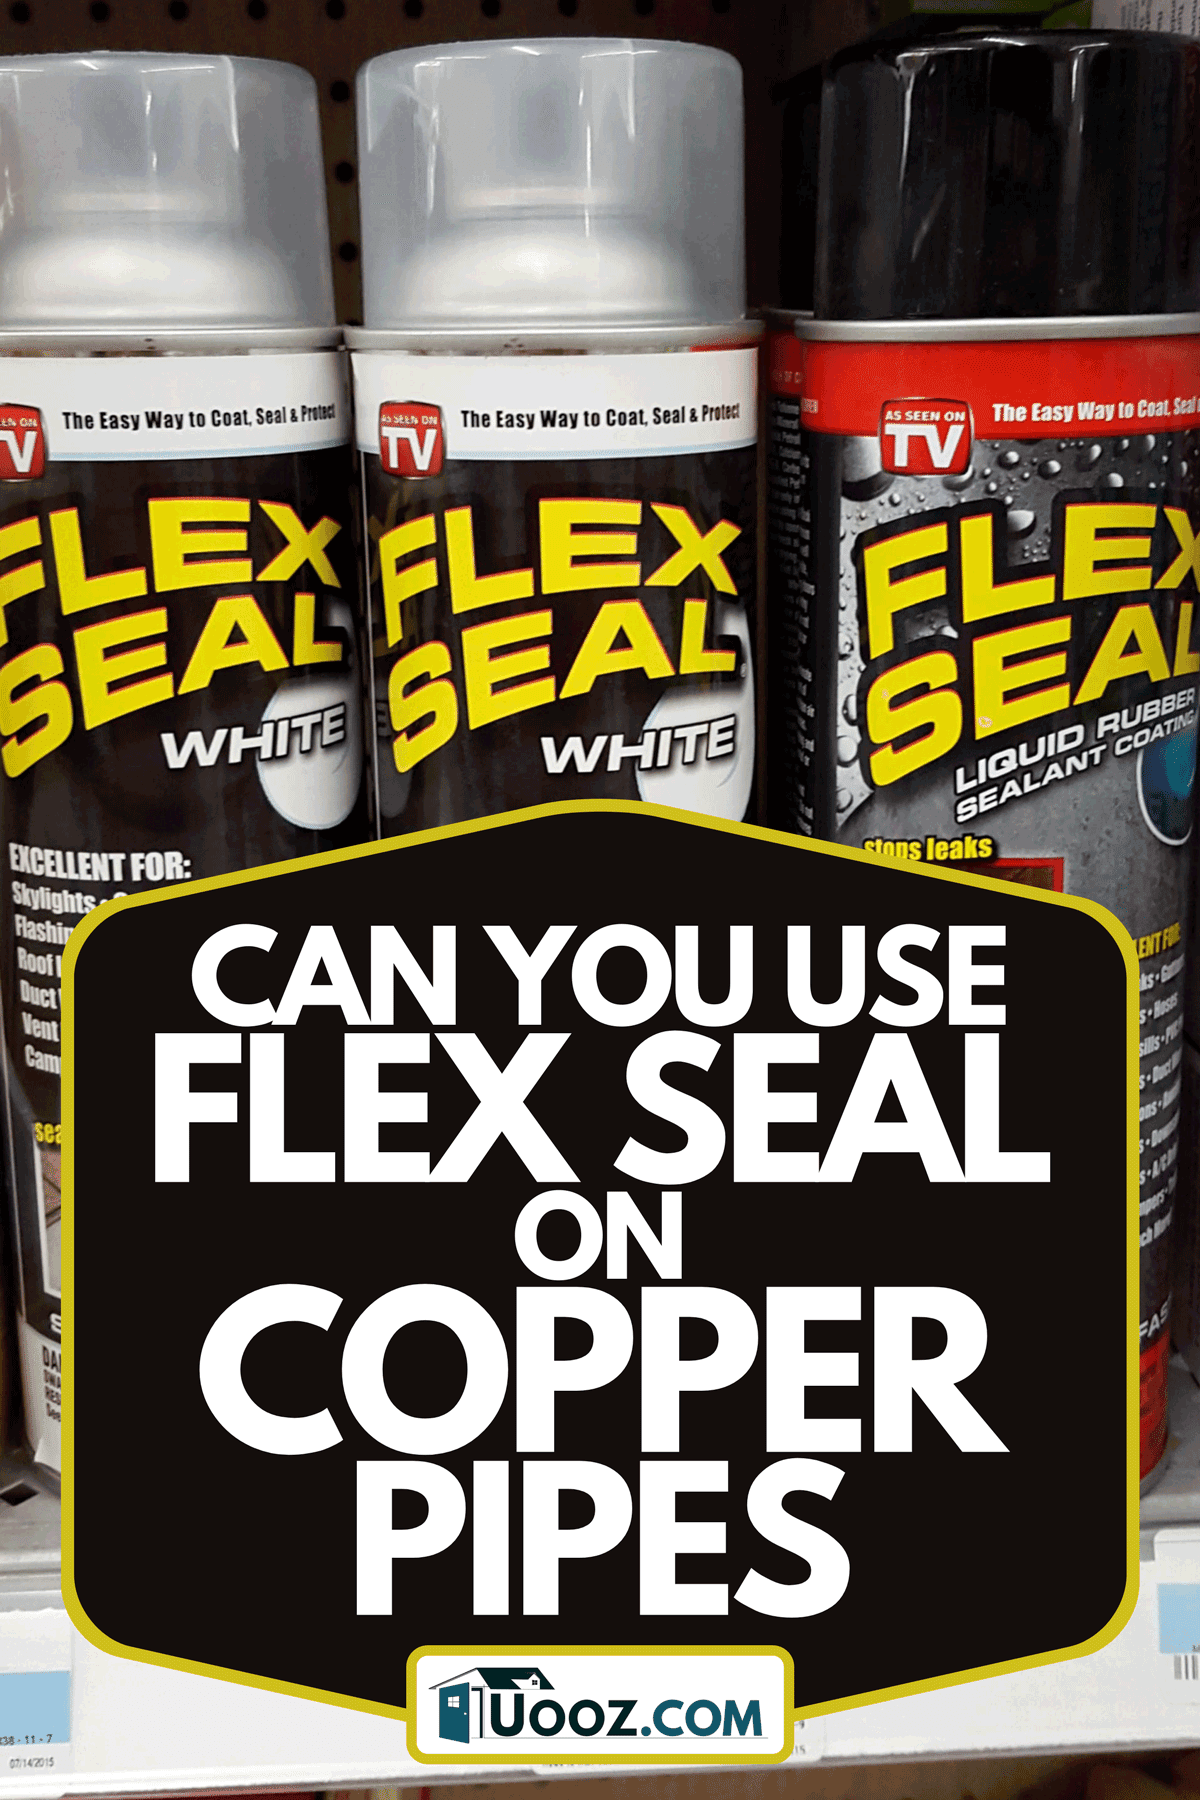 A Flex Seal liquid sealer lubricant on display, Can You Use Flex Seal On Copper Pipes